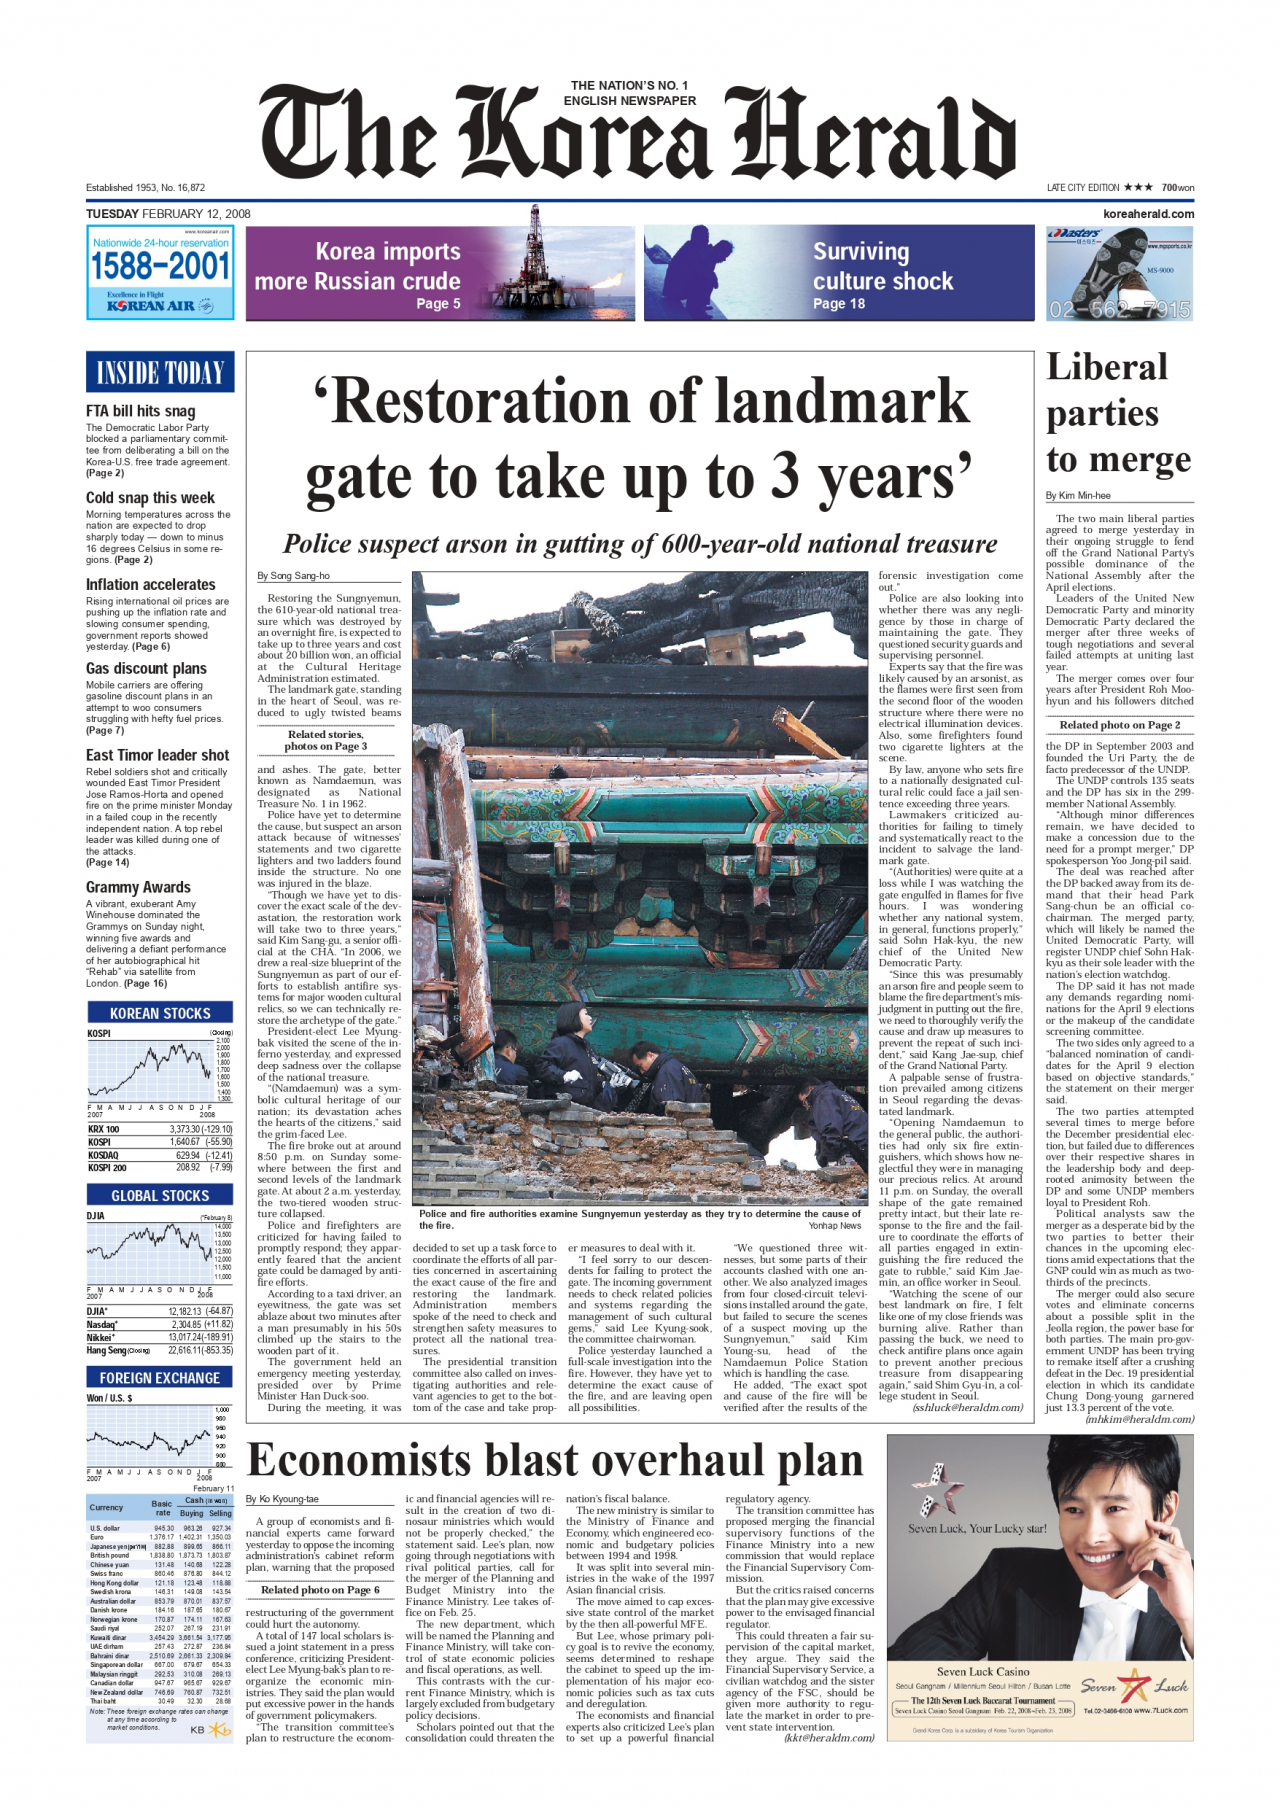 Front page of the Feb. 12, 2008, edition of The Korea Herald (The Korea Herald)